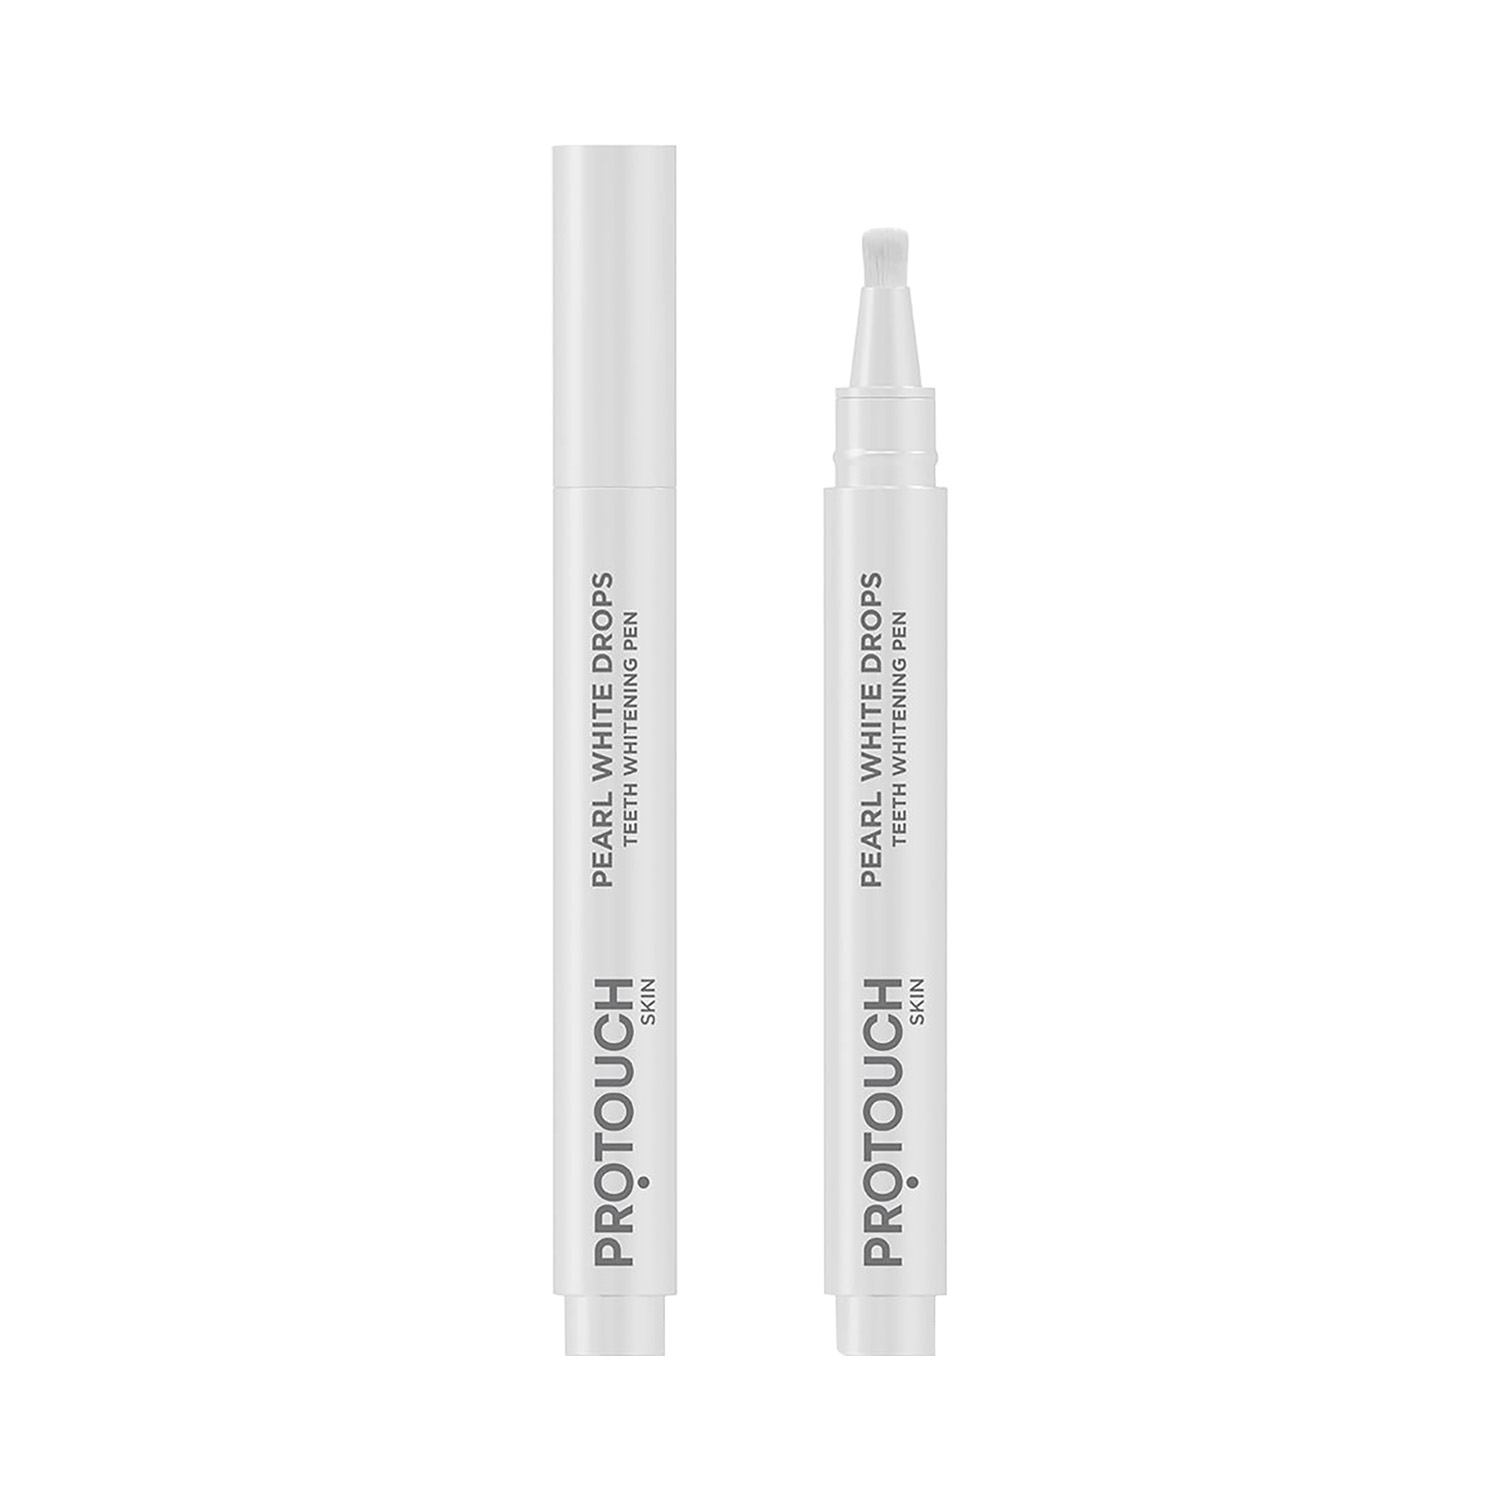 Protouch | Protouch Pearl White Drops Teeth Whitening Pen (2.8ml)